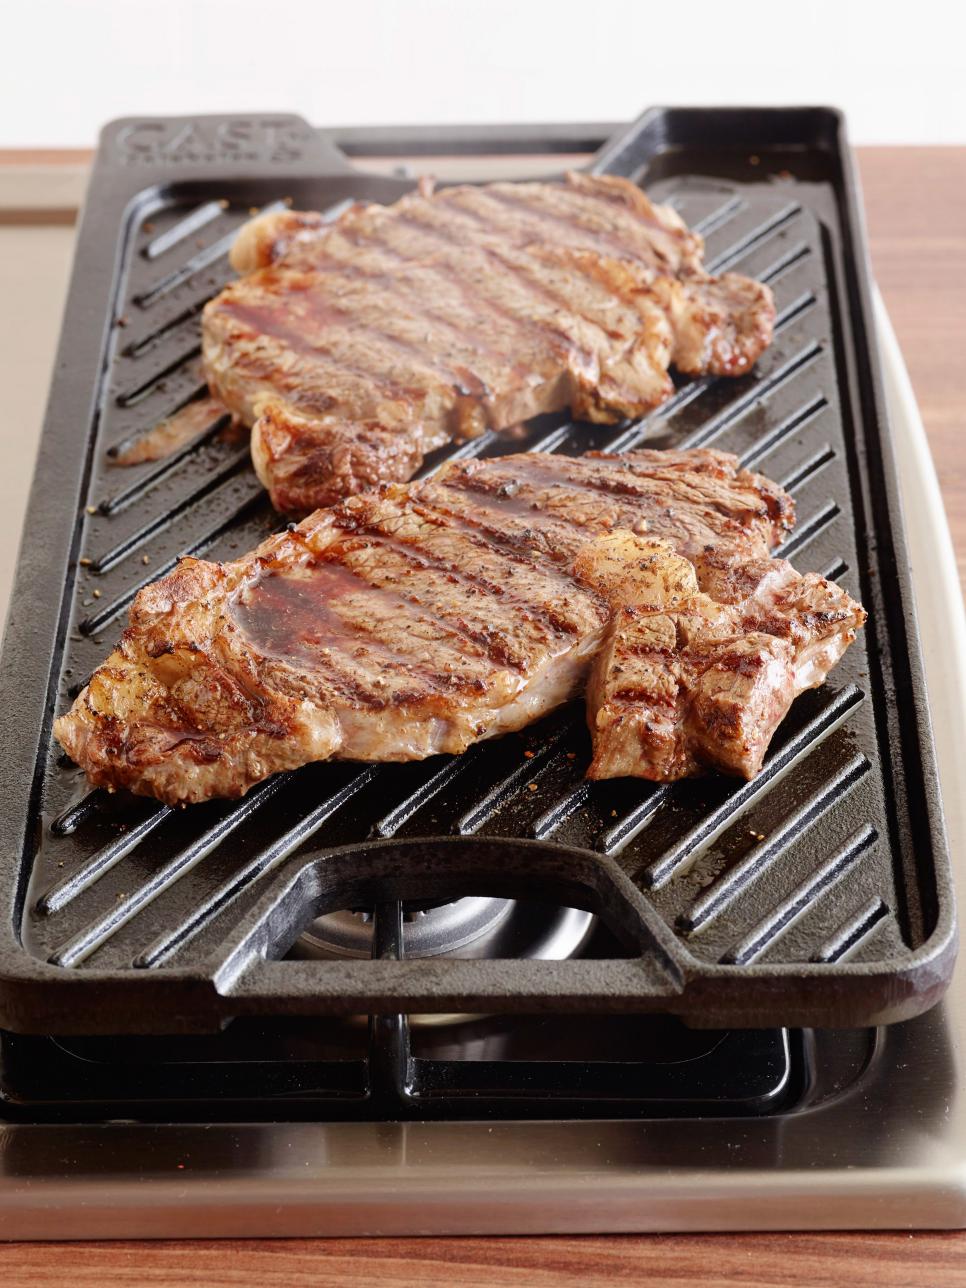 Tips For A Perfect Grilled Meat Food Network Grilling And Summer How Tos Recipes And Ideas 